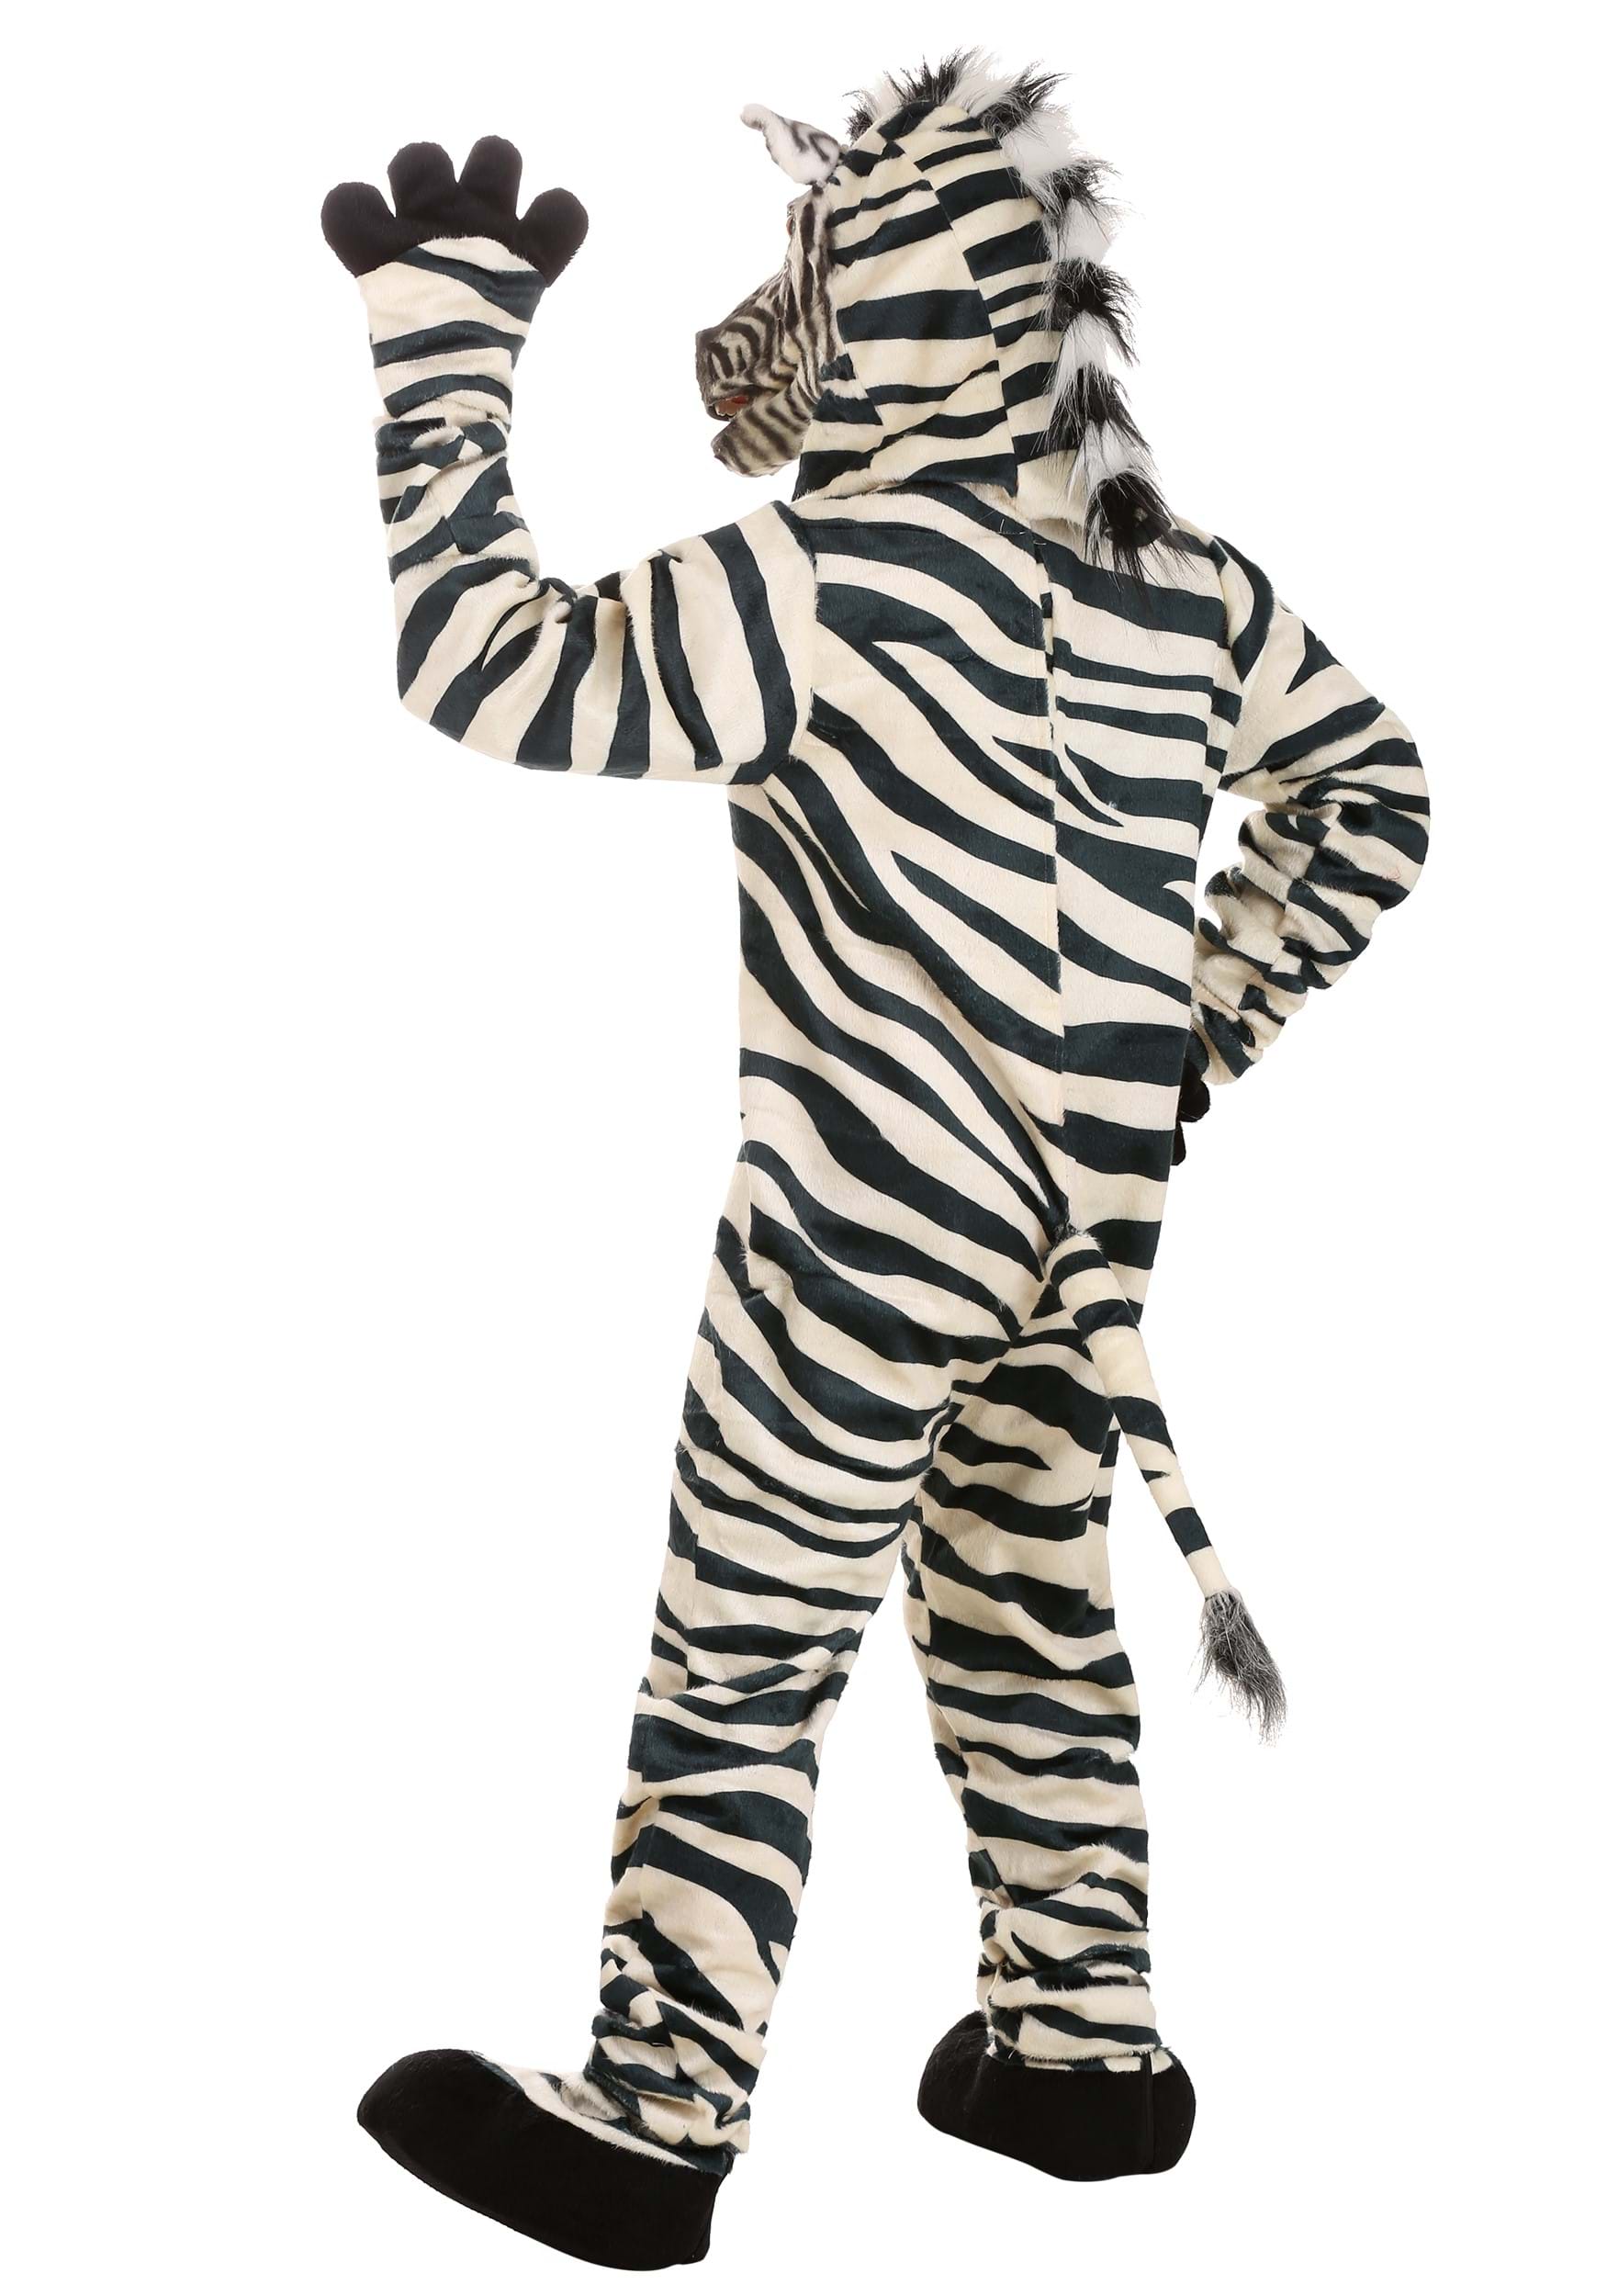 Zebra Suit With Mouth Mover Mask For Adults